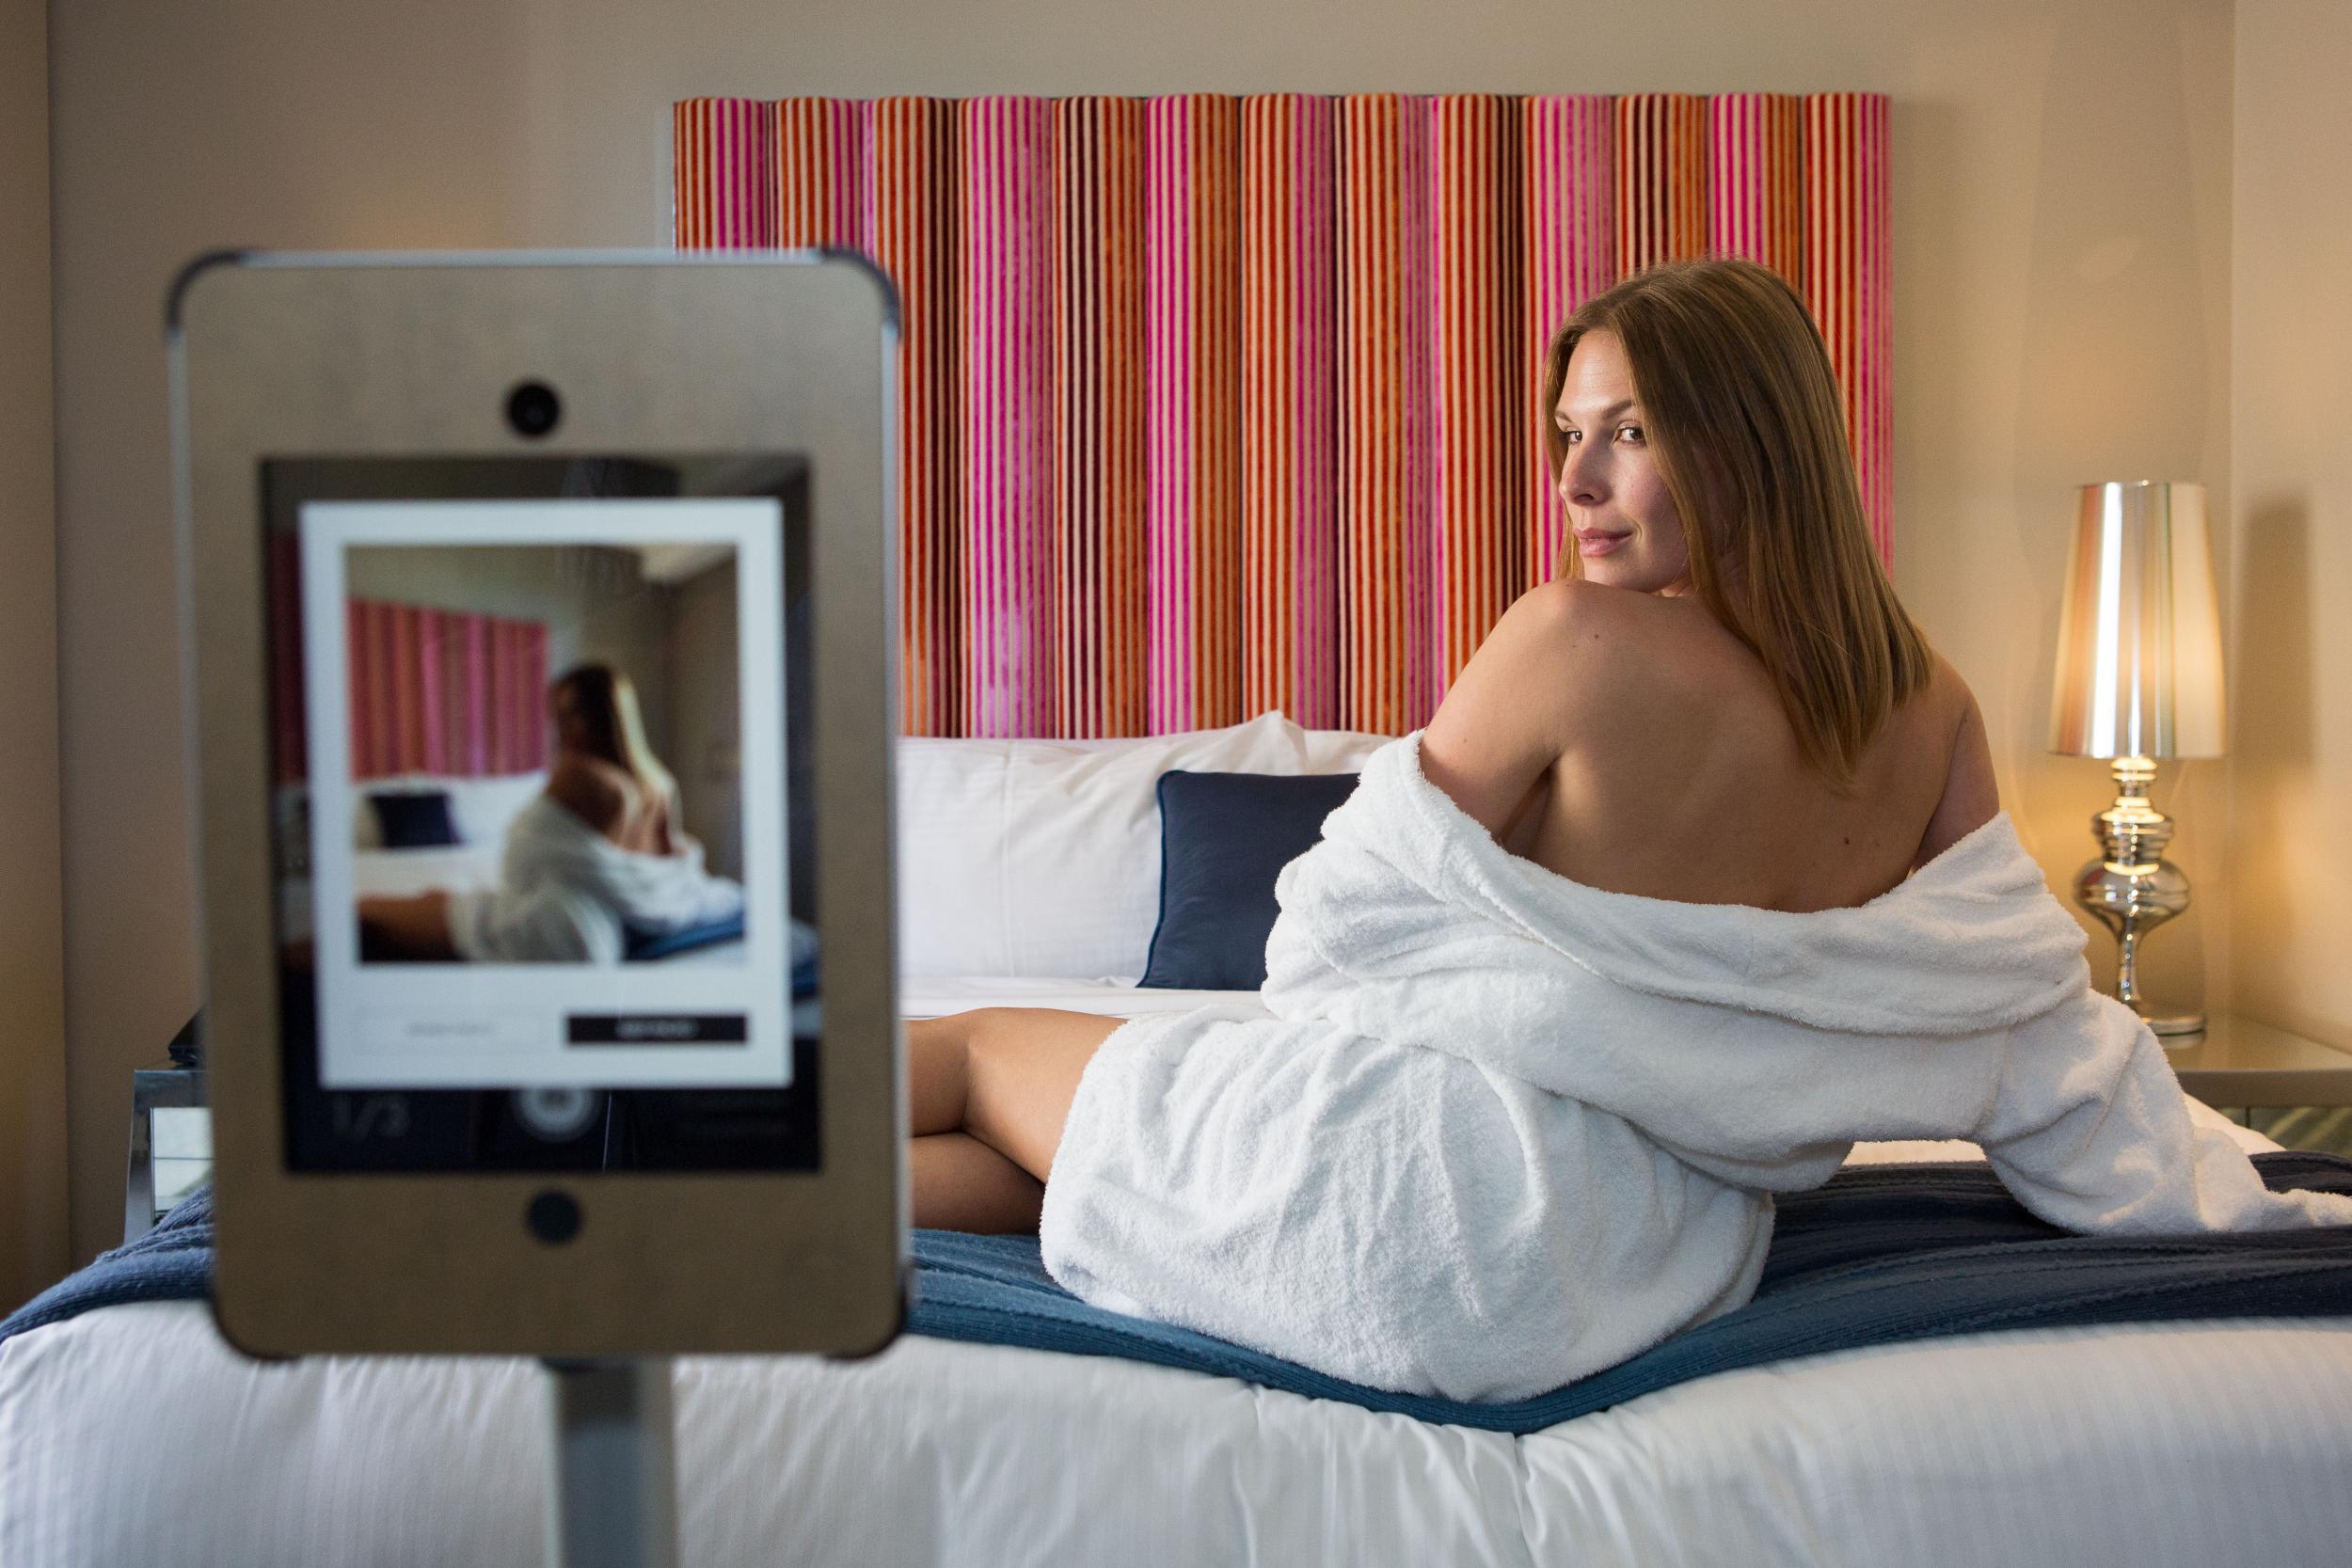 The hotel that encourages guests to pose naked for artistic sketches The Independent The Independent picture